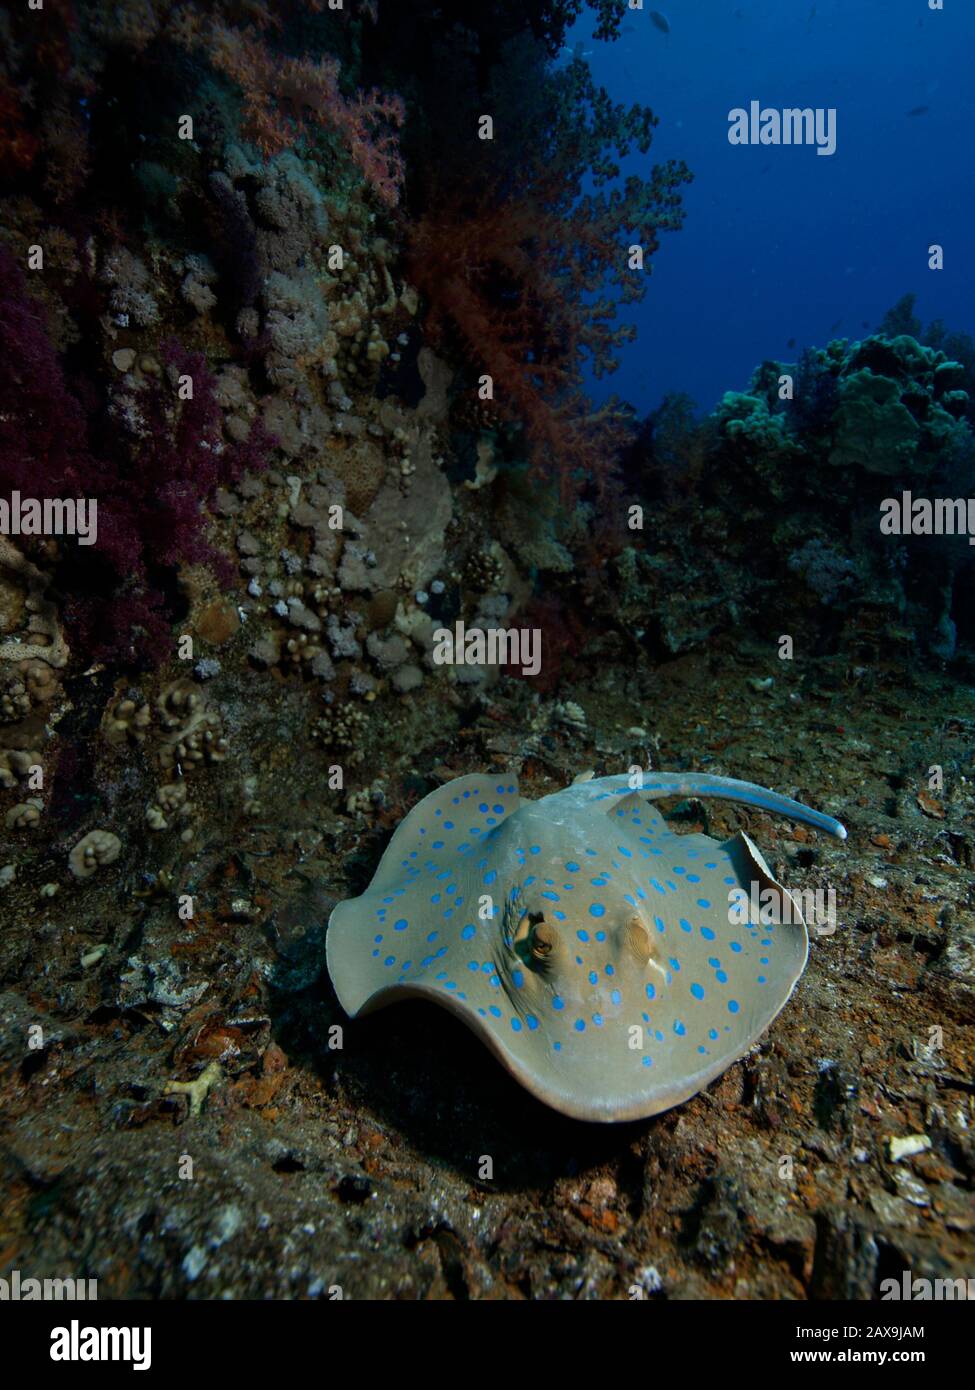 A blue spotted lagoon ray skims across wreckage of the 'Toilet Wreck' on Yolanda reef in the Red Sea. Stock Photo